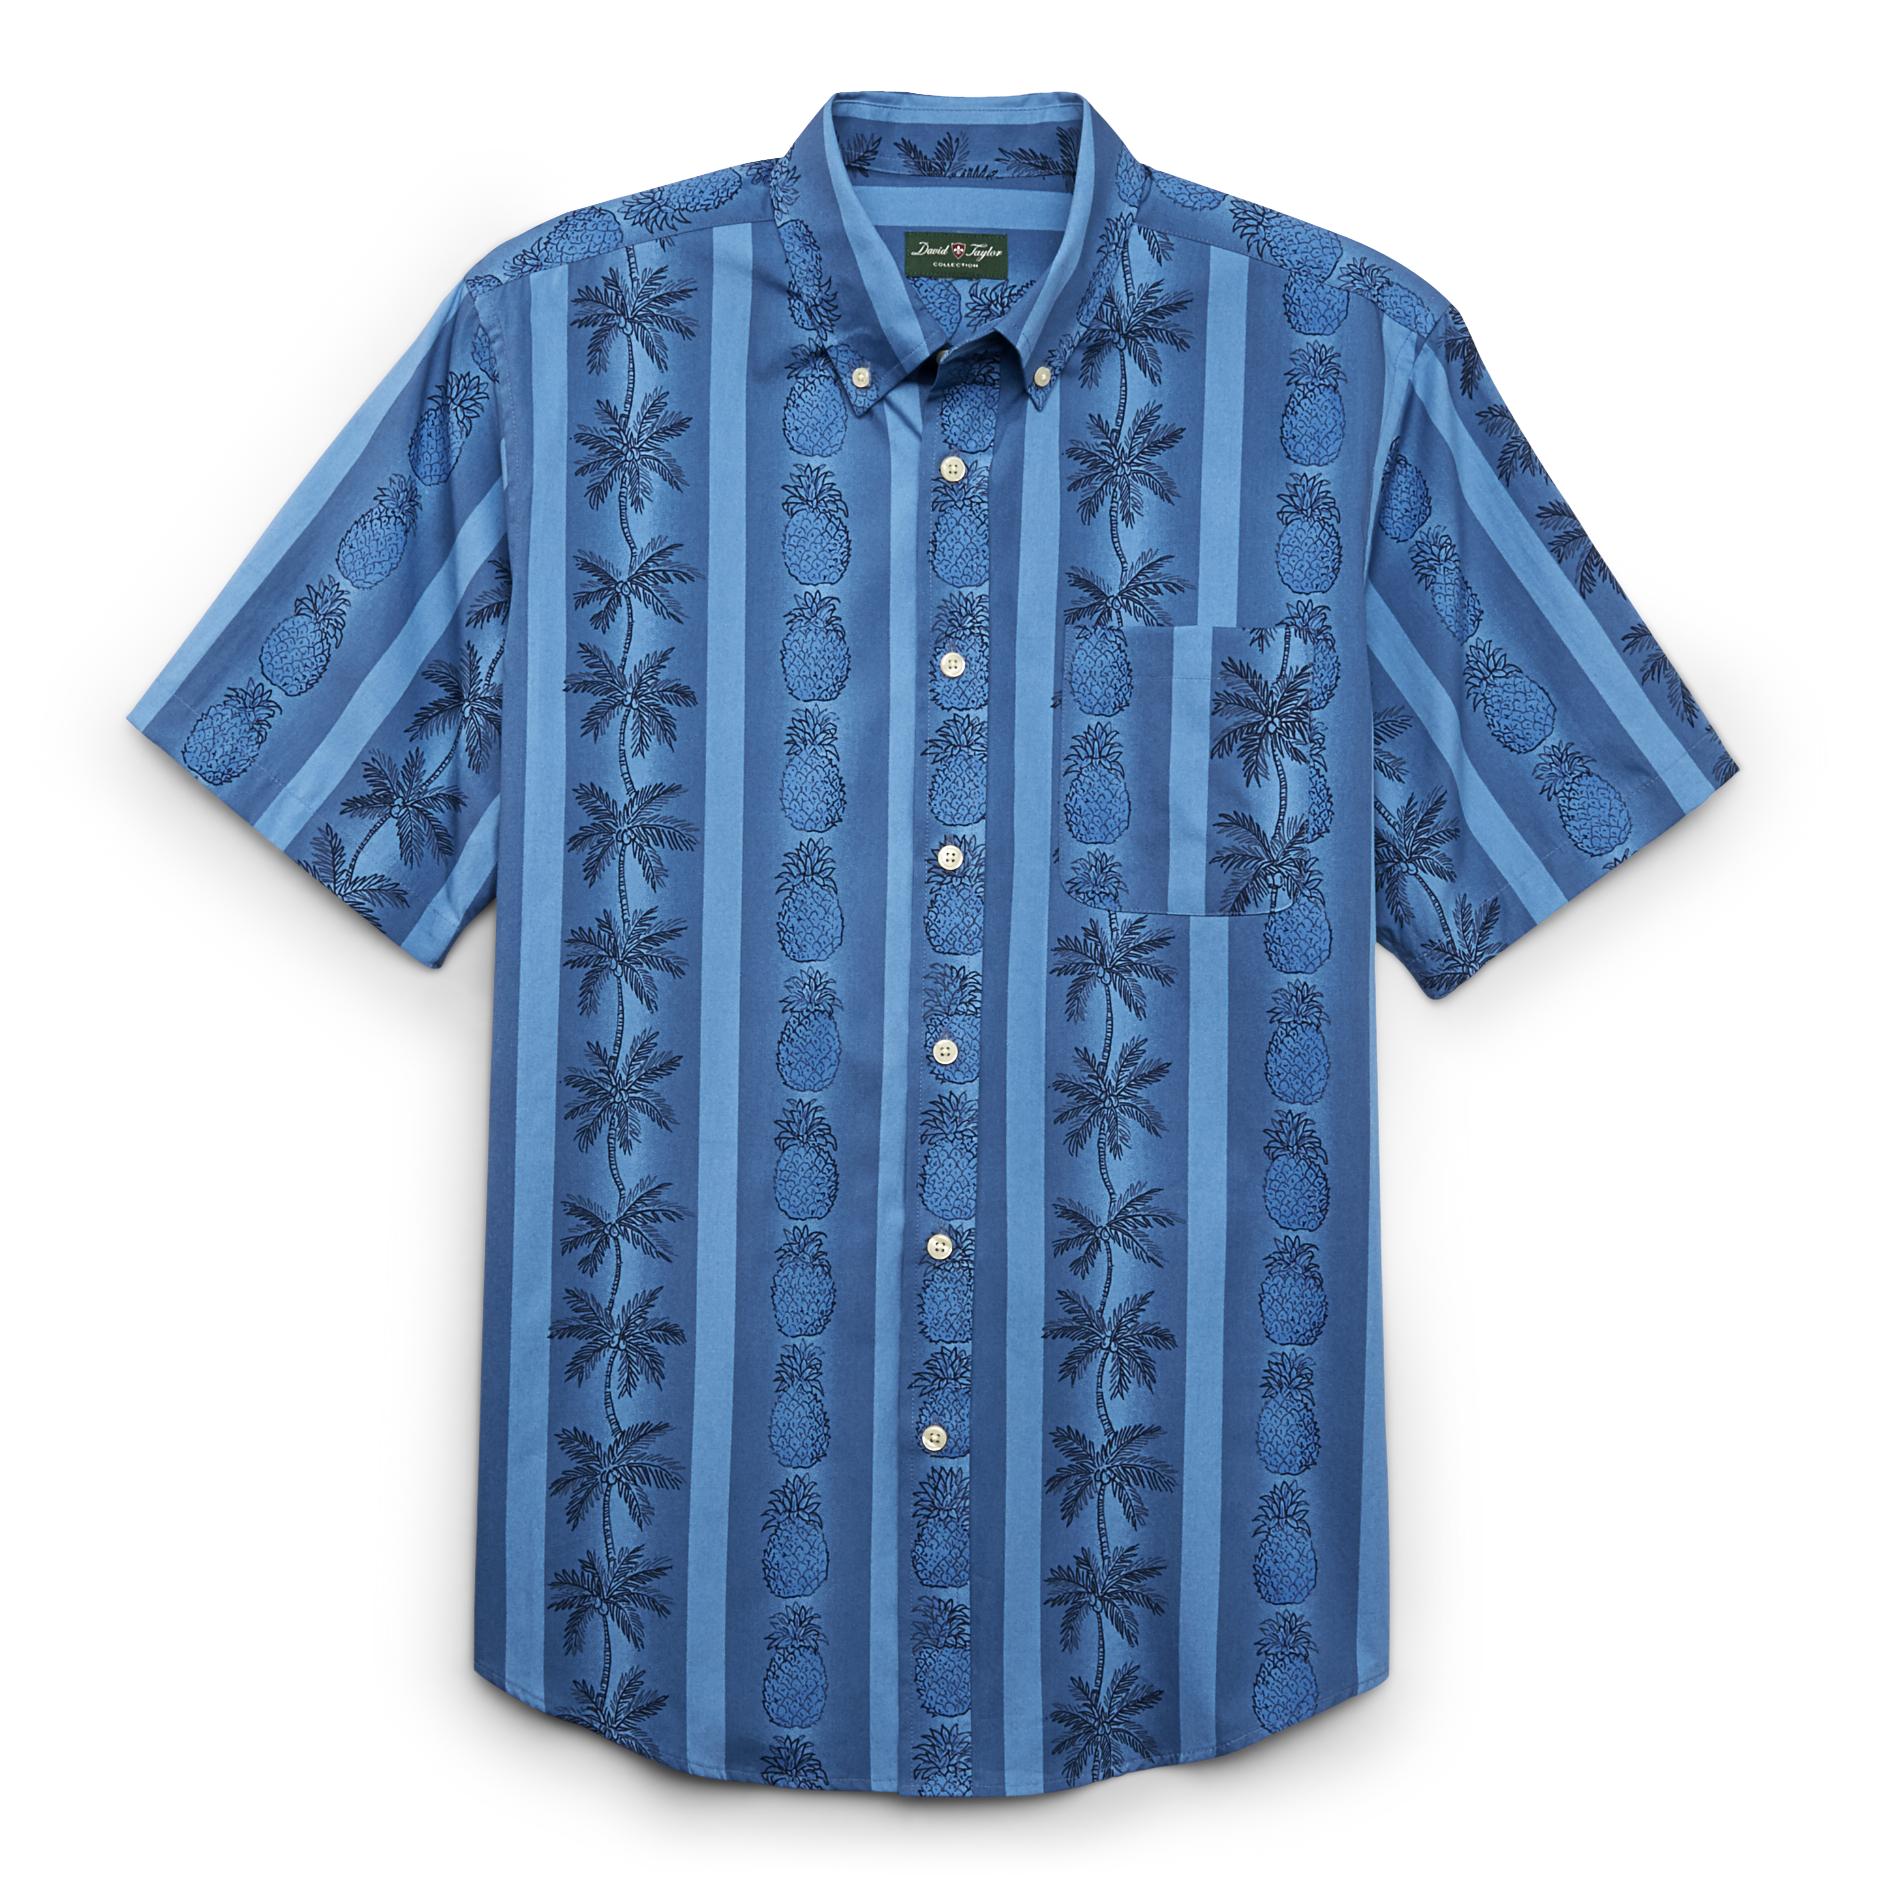 David Taylor Collection Men's Short-Sleeve Button-Front Shirt - Pineapples & Palm Trees